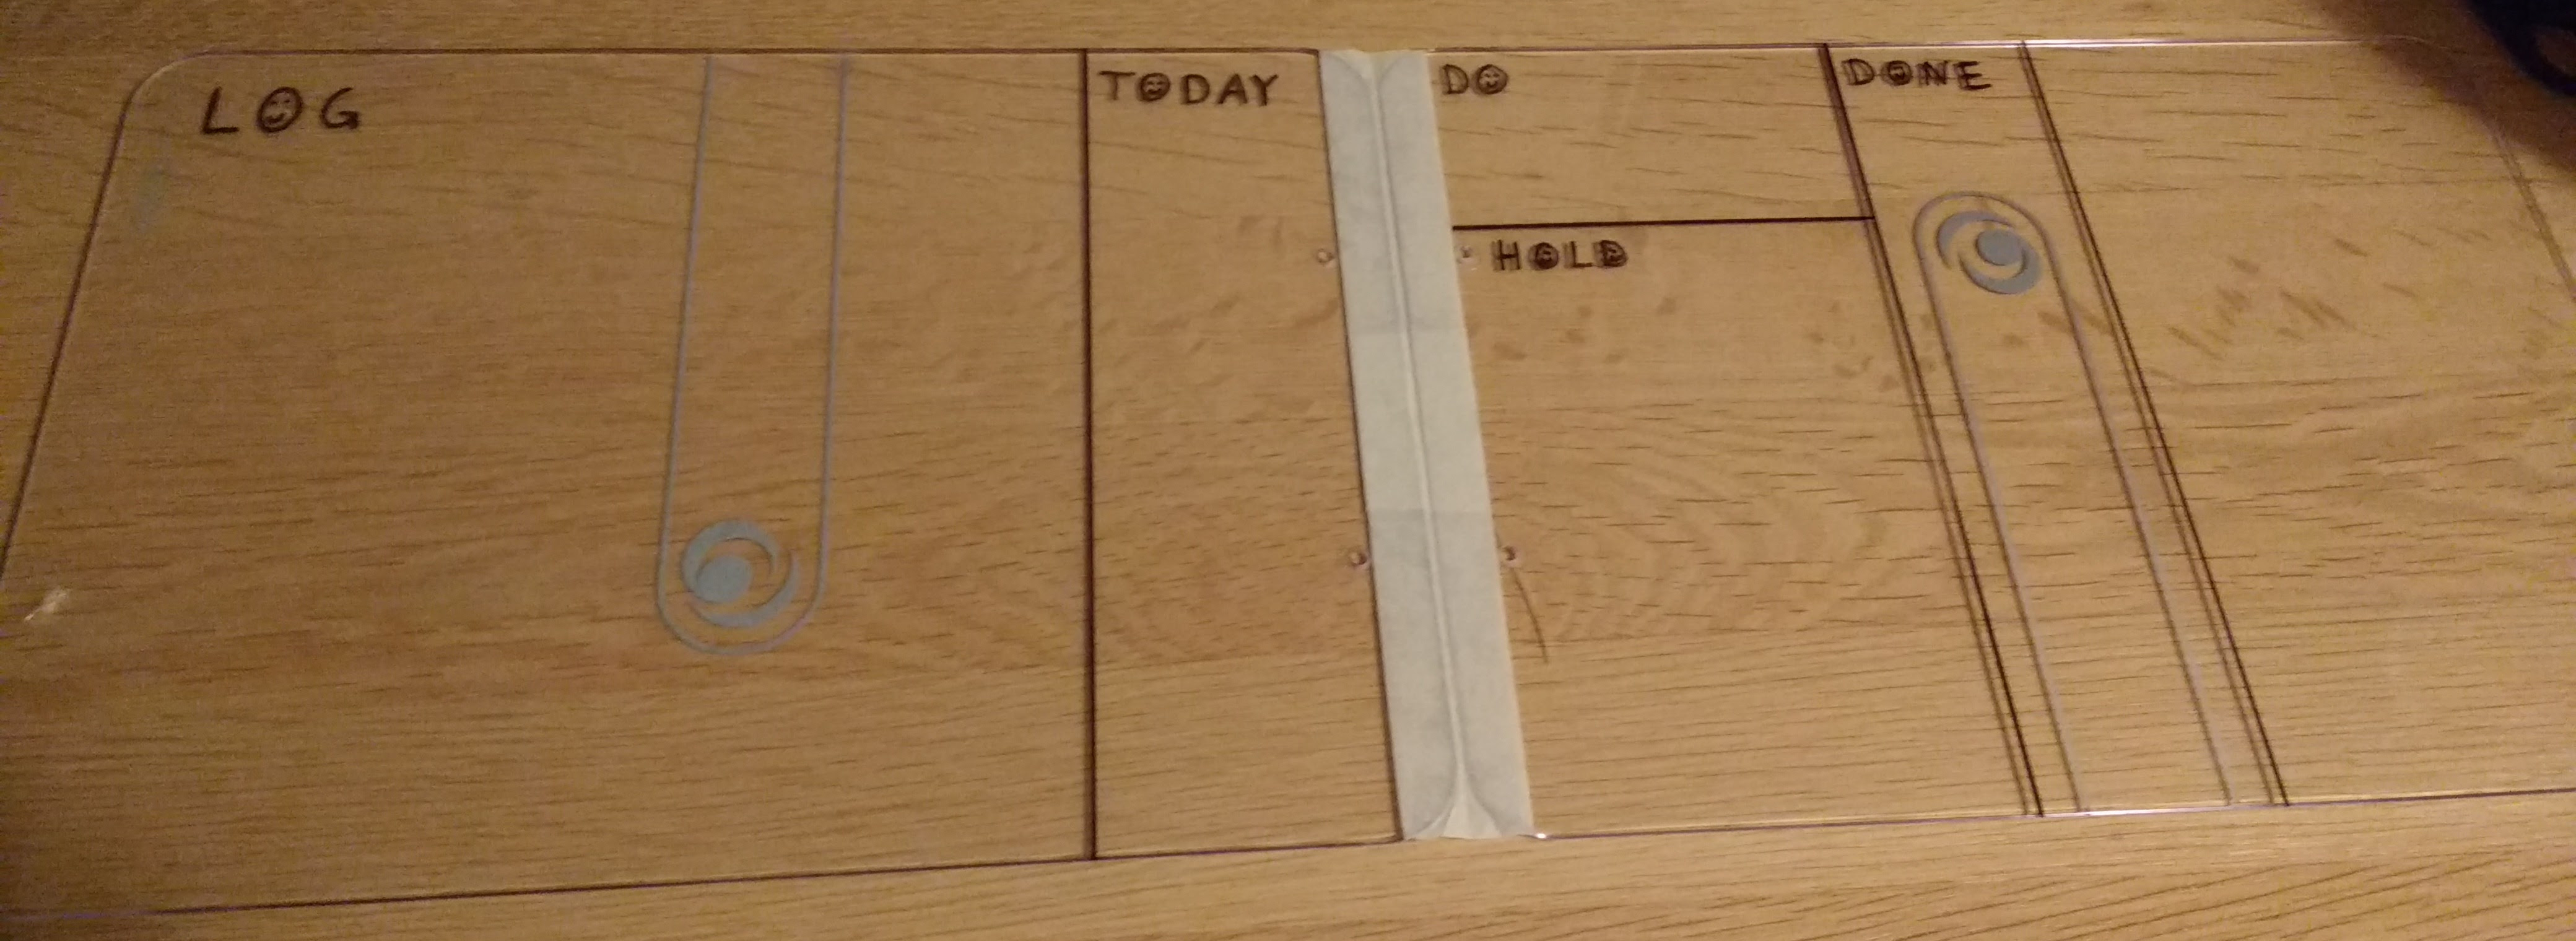 Black Personal Kanban board with white ink